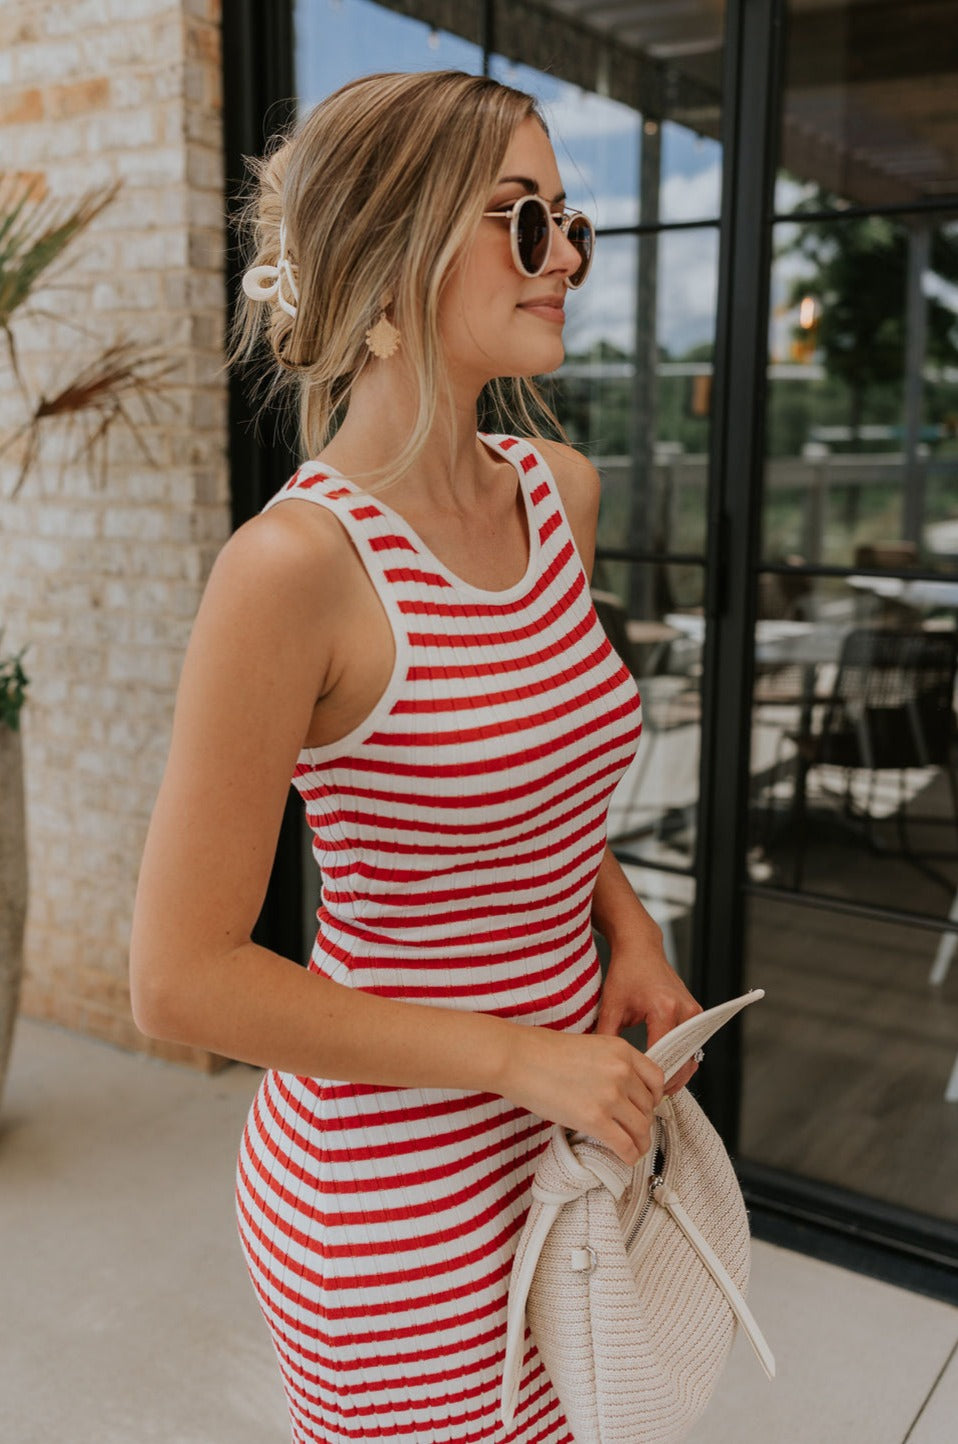 Upper body side view of female model wearing the Delilah Red & White Striped Midi DressDelilah Red & White Striped Midi Dress that has horizontal red and white stripes, a round neck, sleeveless, and midi hem.